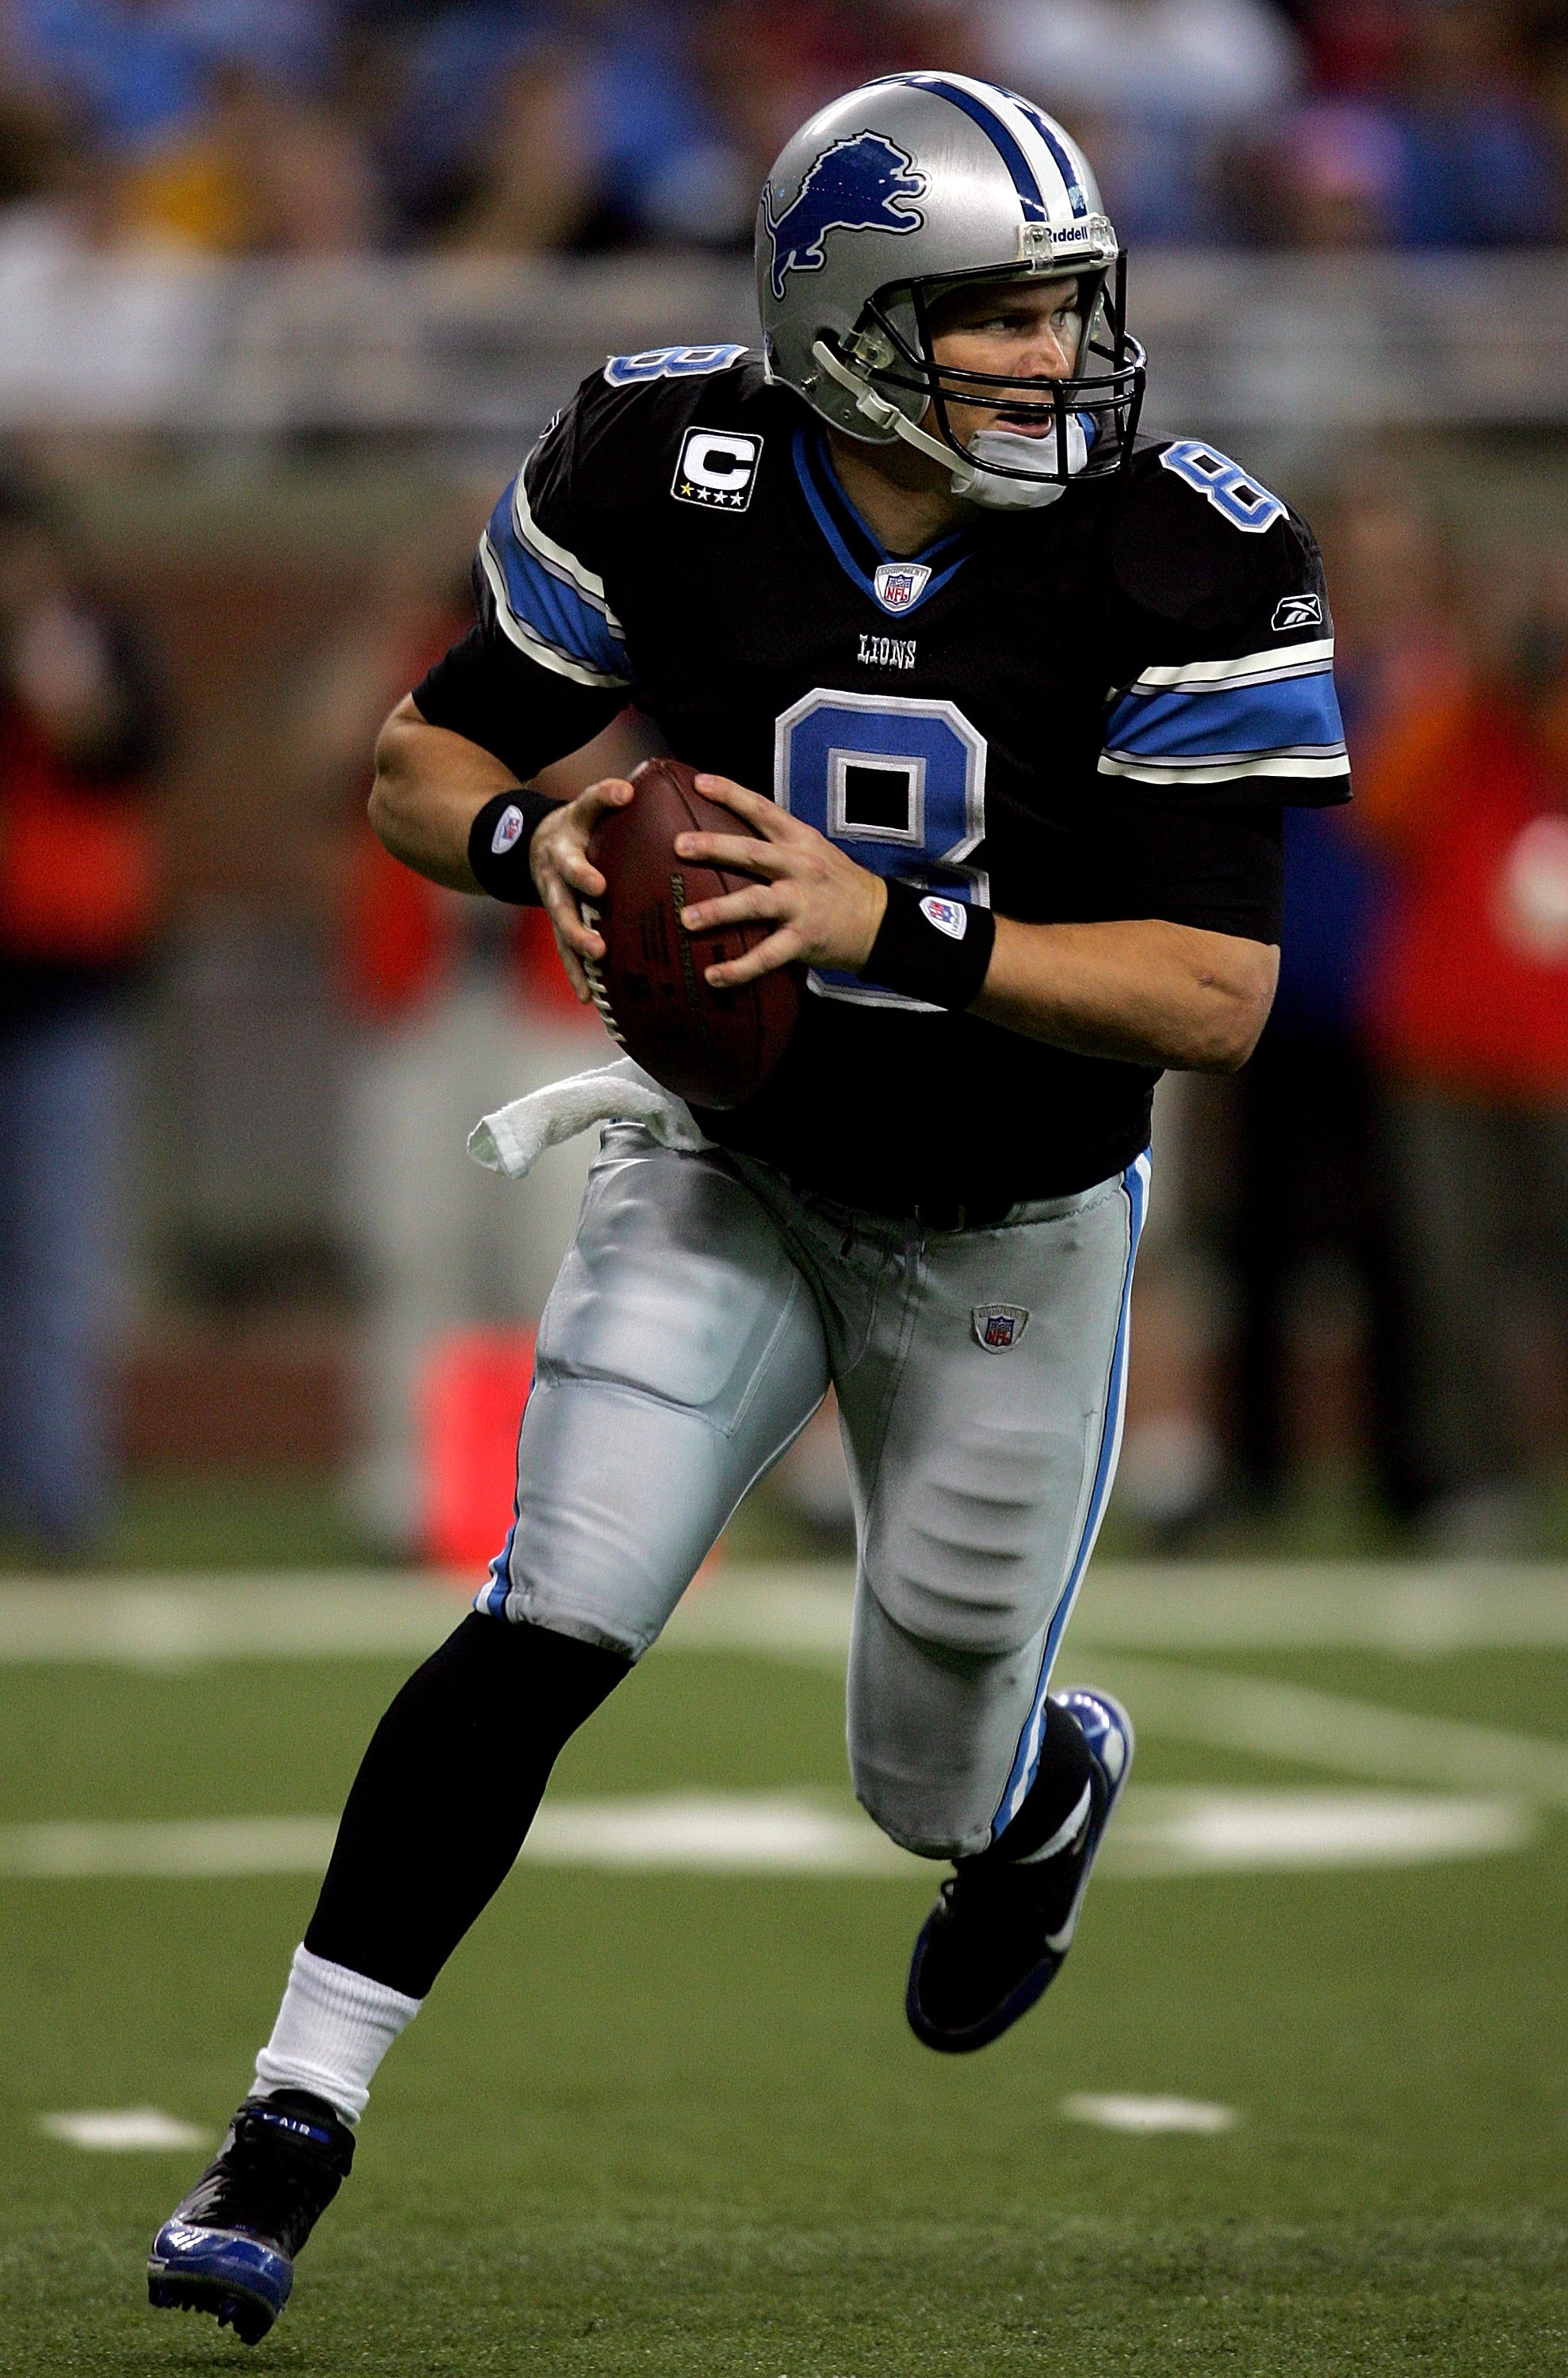 DETROIT - OCTOBER 21: Jon Kitna #8 of the Detroit Lions rolls out of the pocket against the Tampa Bay Buccaneers October 21, 2007 at Ford Field in Detroit, Michigan.  (Photo by Matthew Stockman/Getty Images)